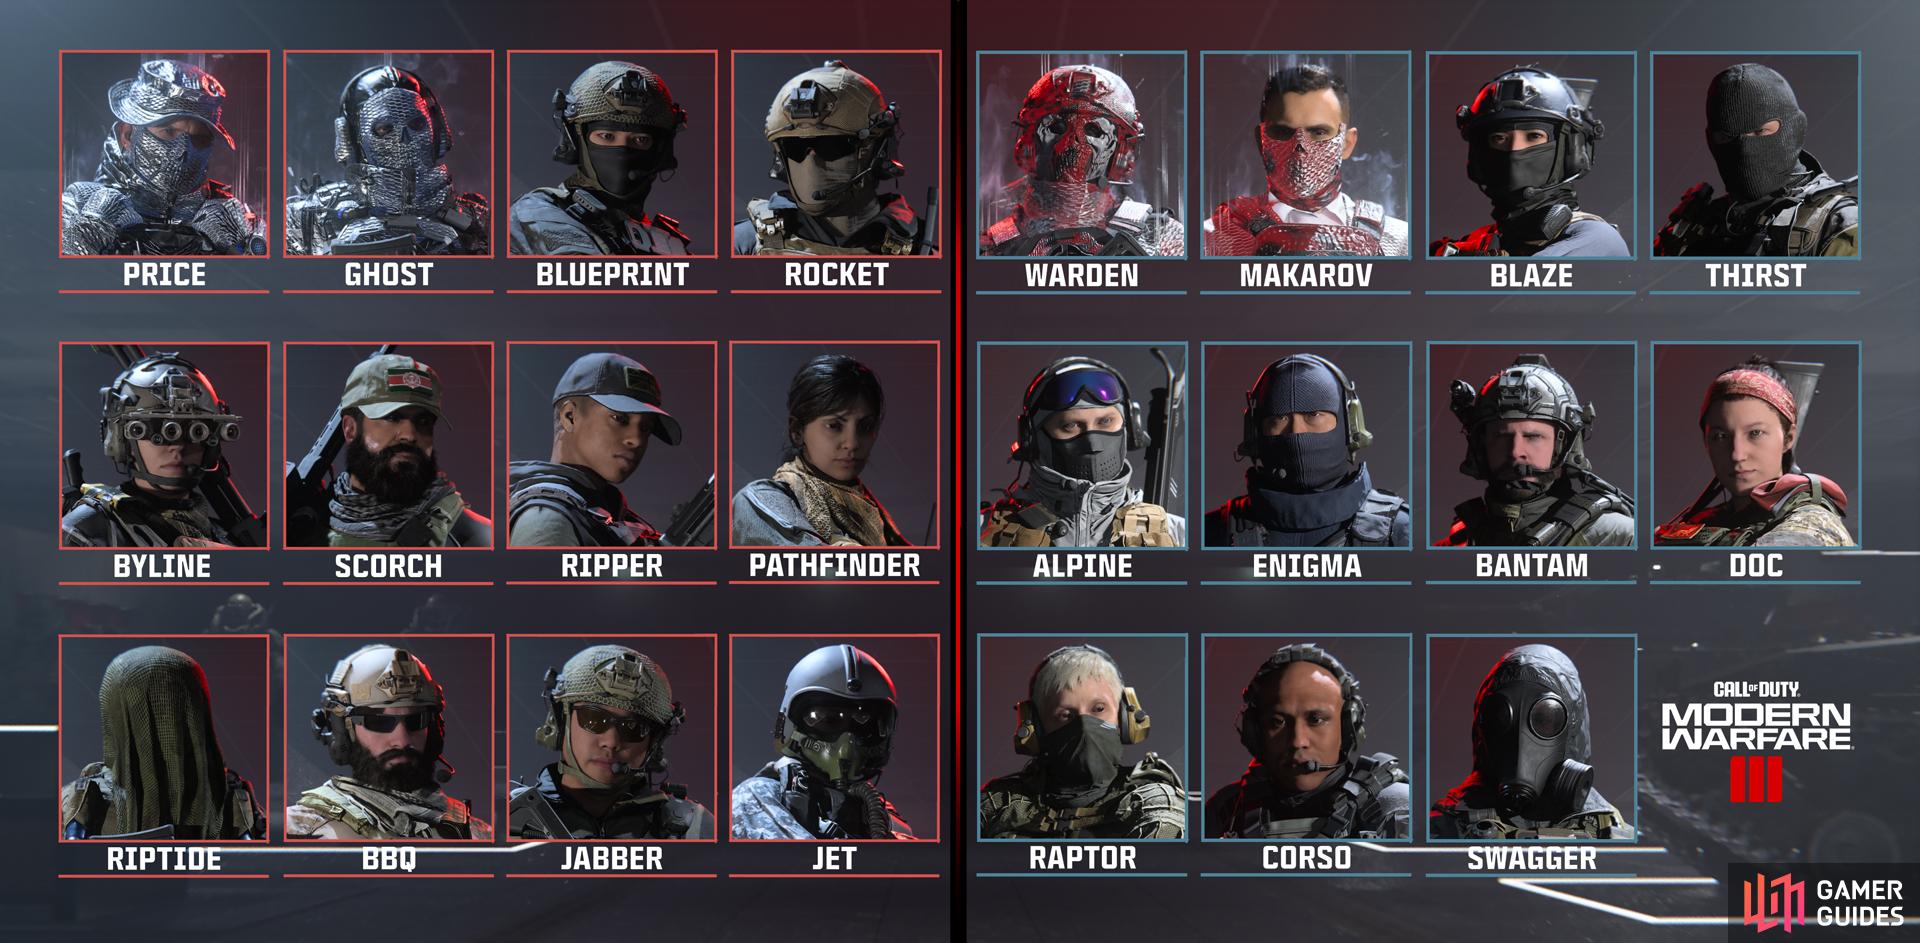 Here are all the new MW3 Operators available at launch. Image via Activision.